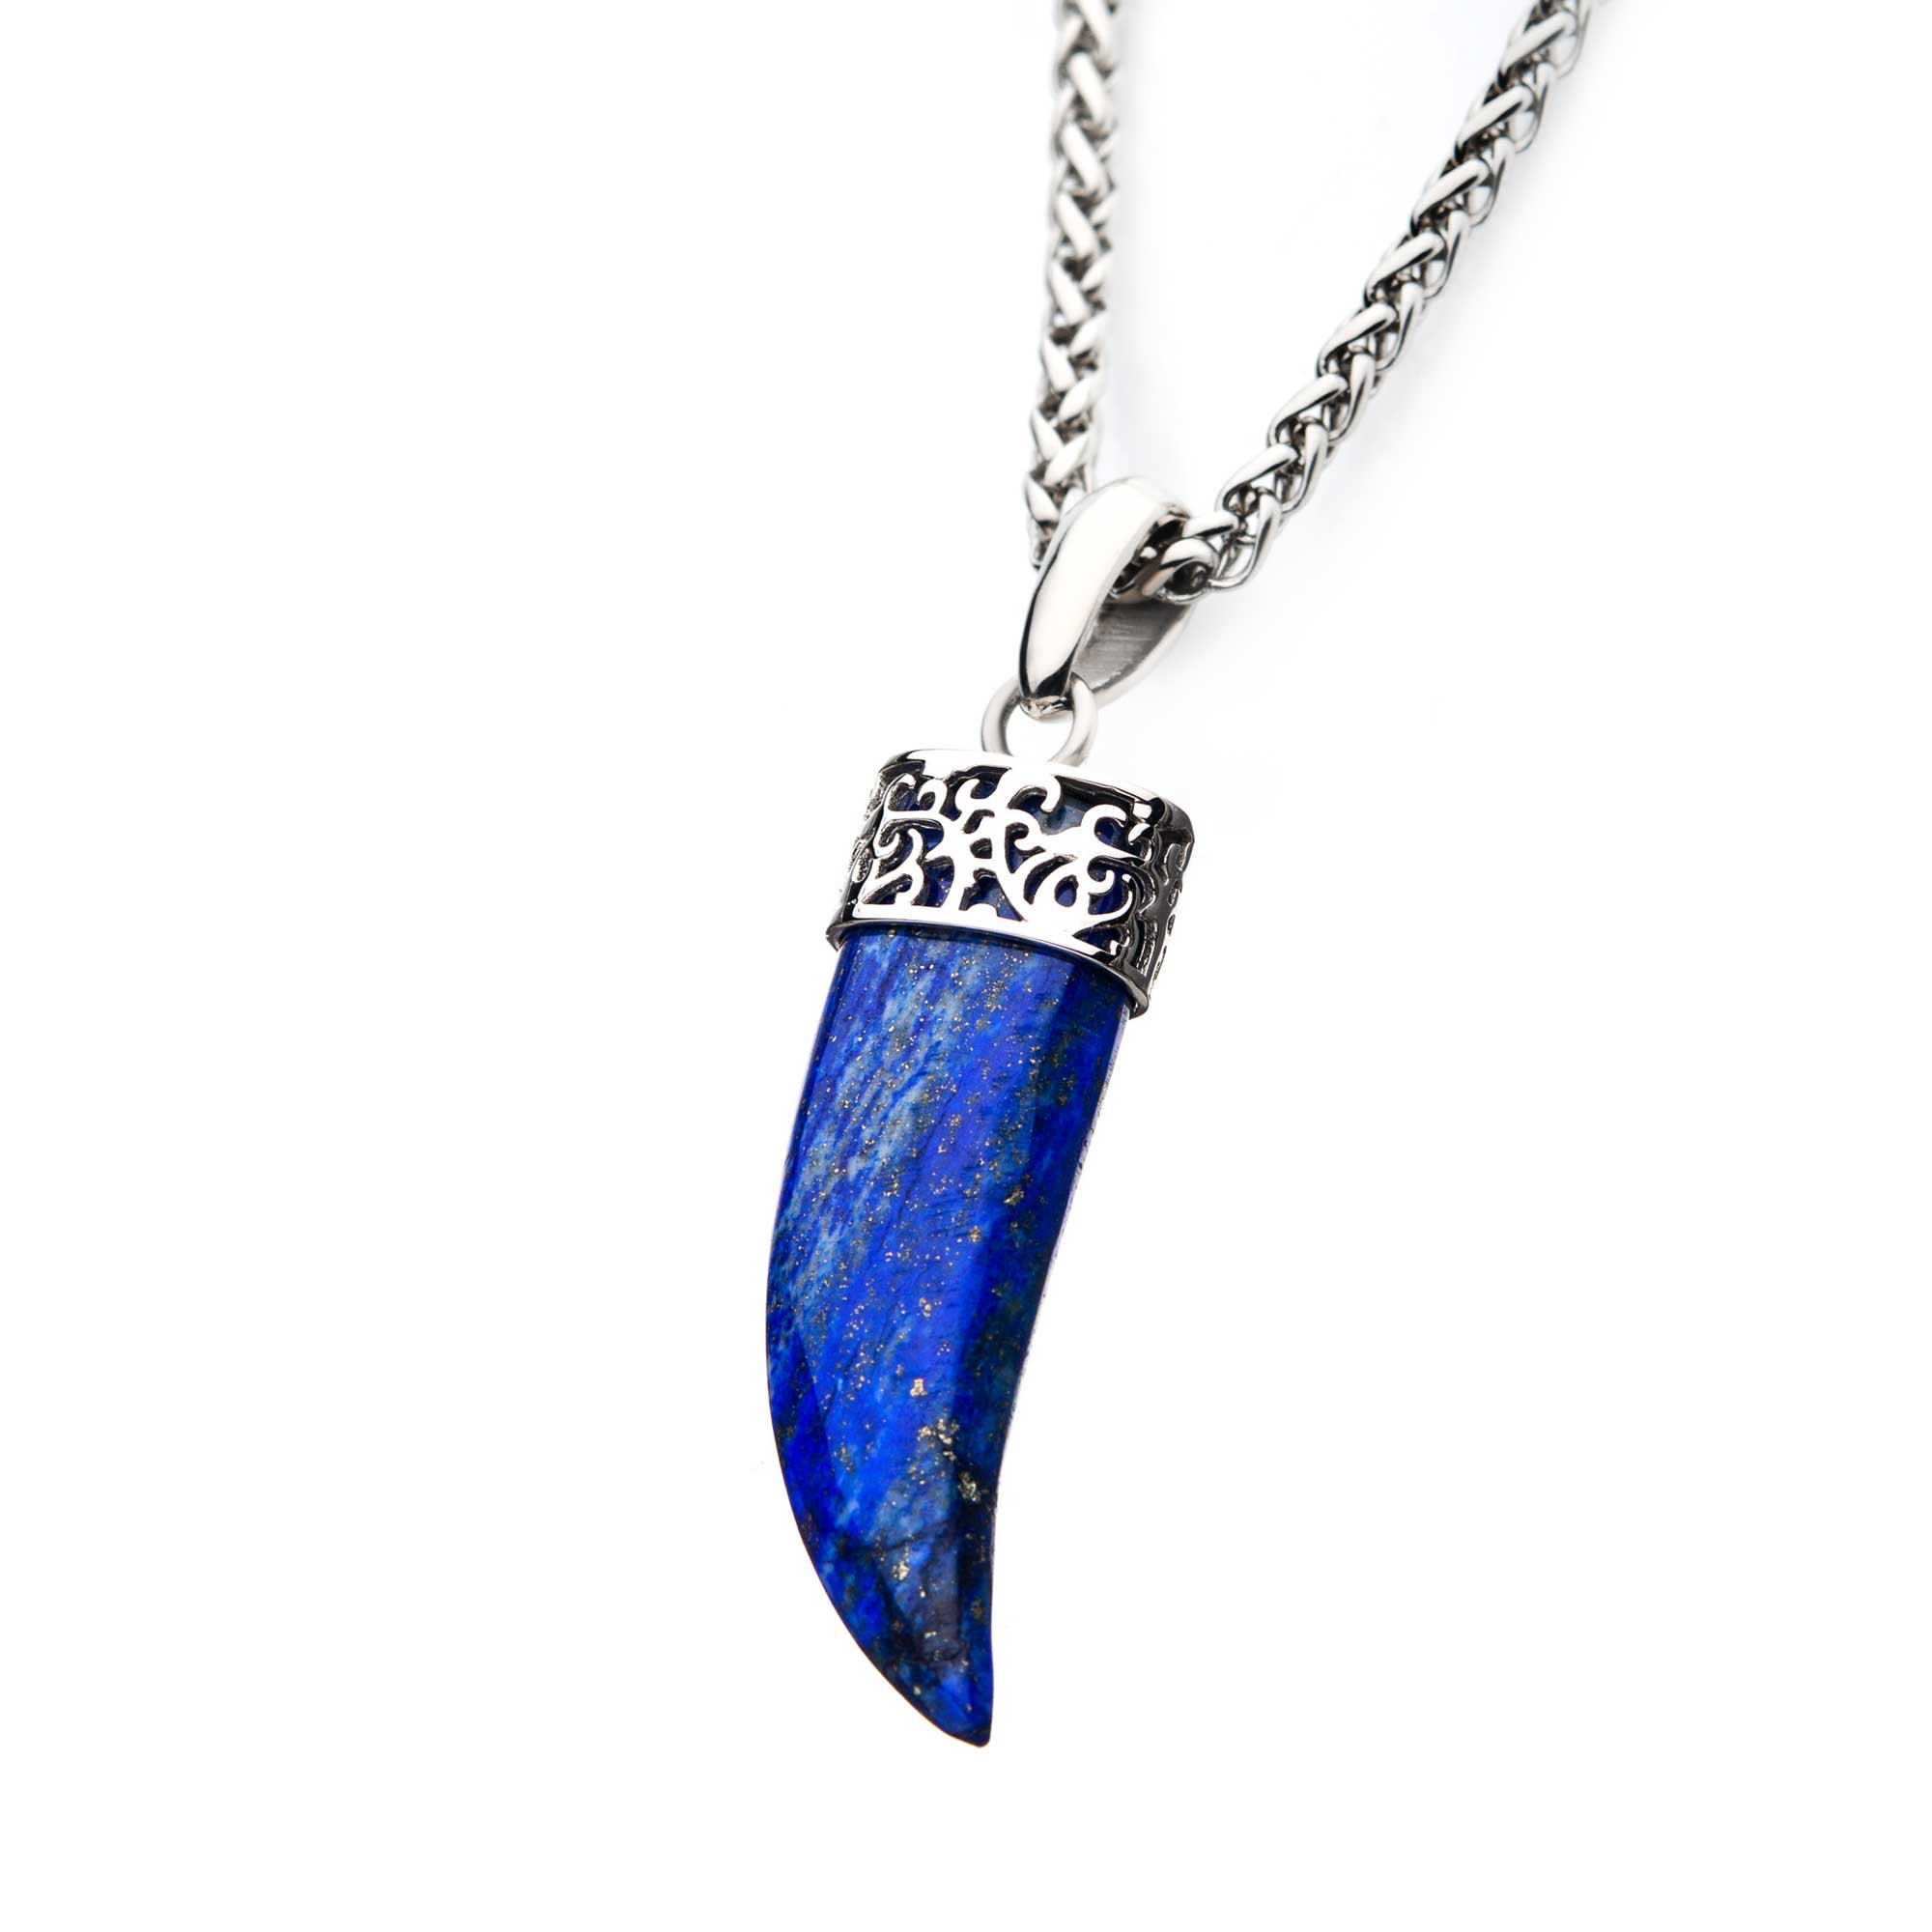 Stainless Steel with Lapis Lazuli Stone Horn Pendant, with Steel Wheat Chain Image 2 Midtown Diamonds Reno, NV